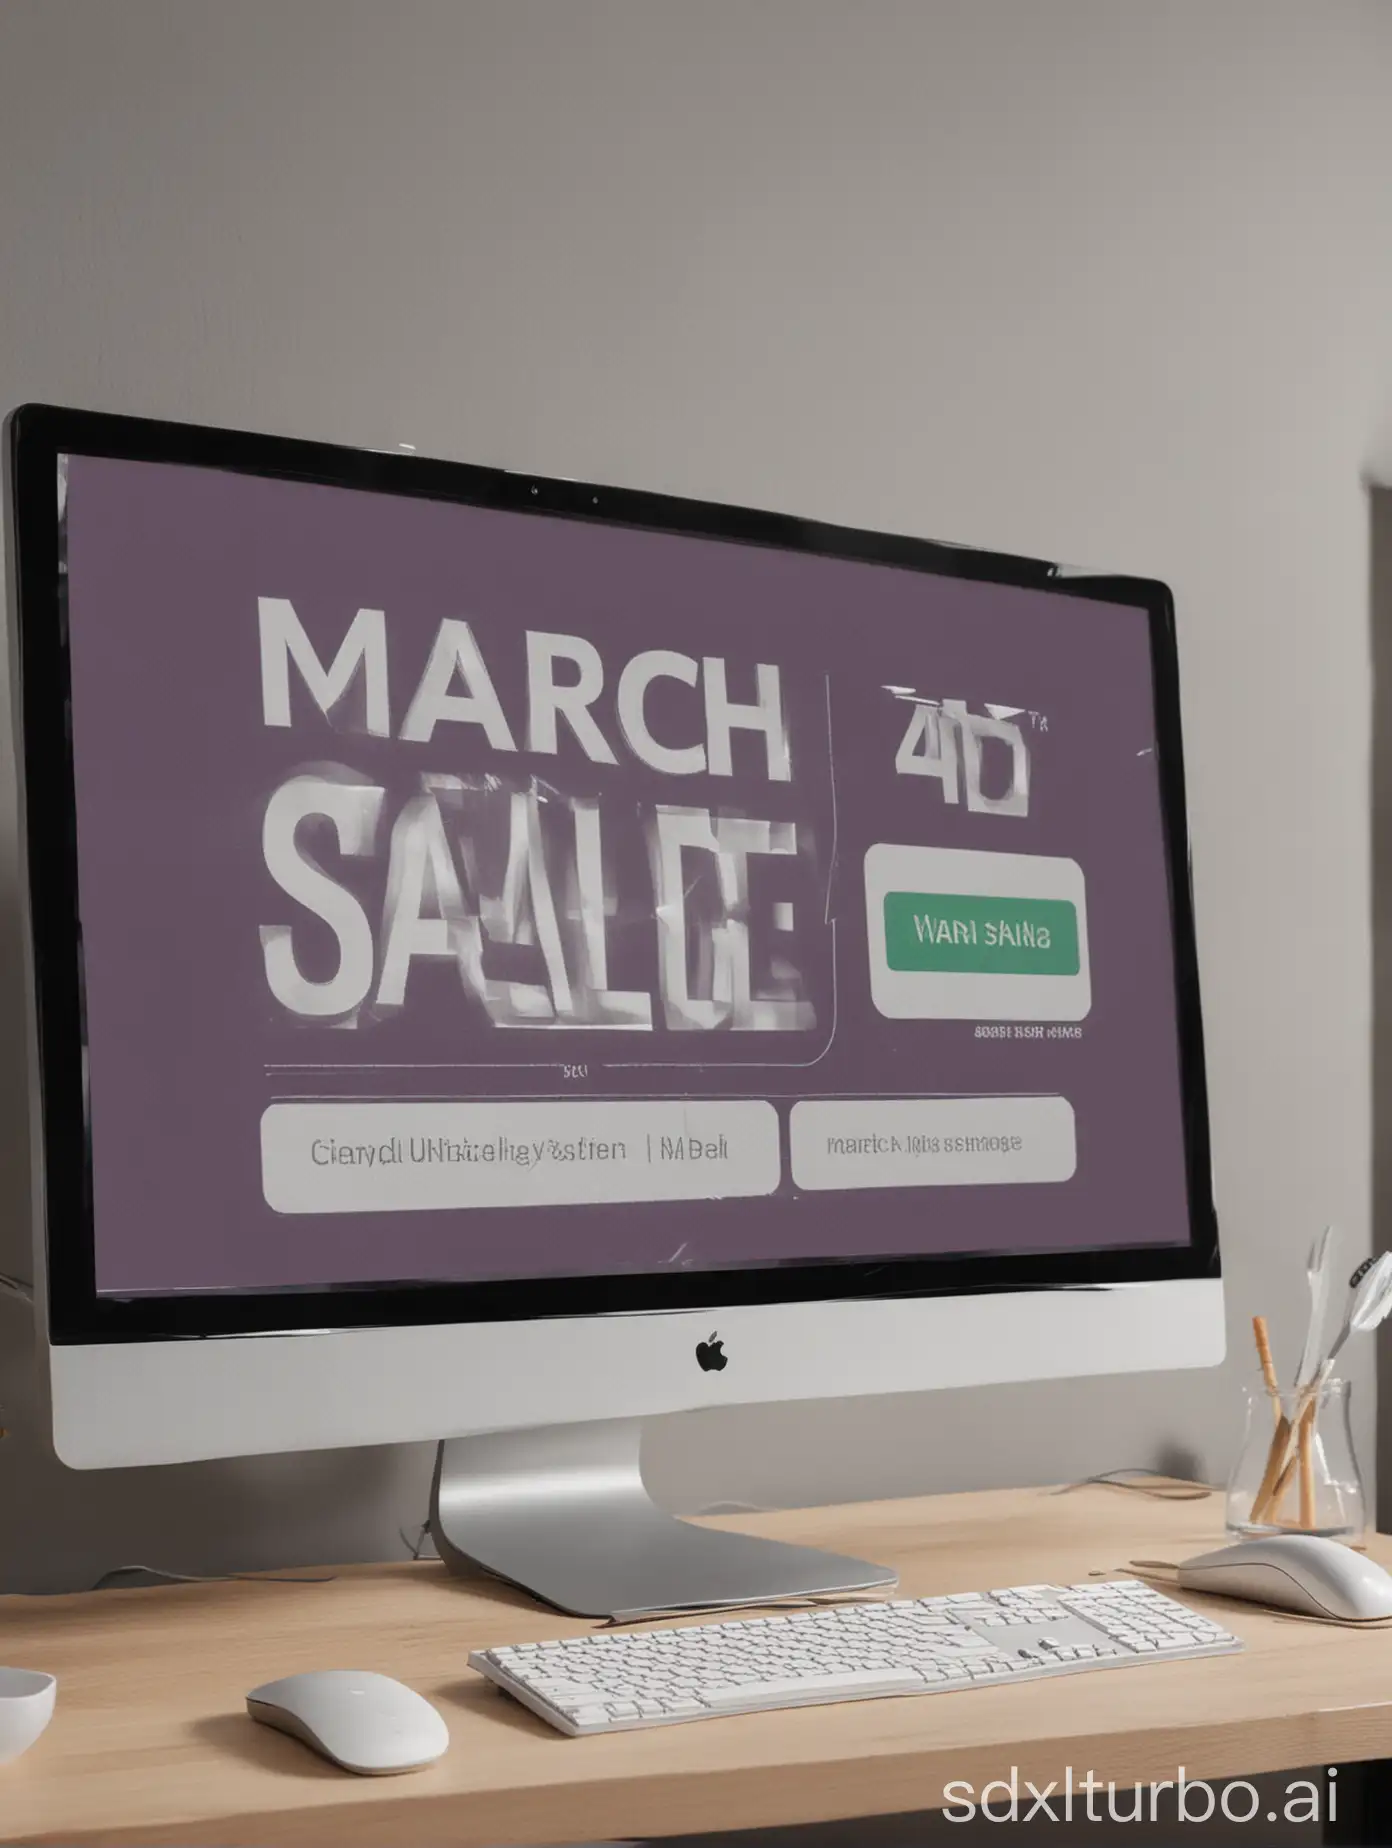 Computer-Screen-Showing-March-Sale-Advertisement